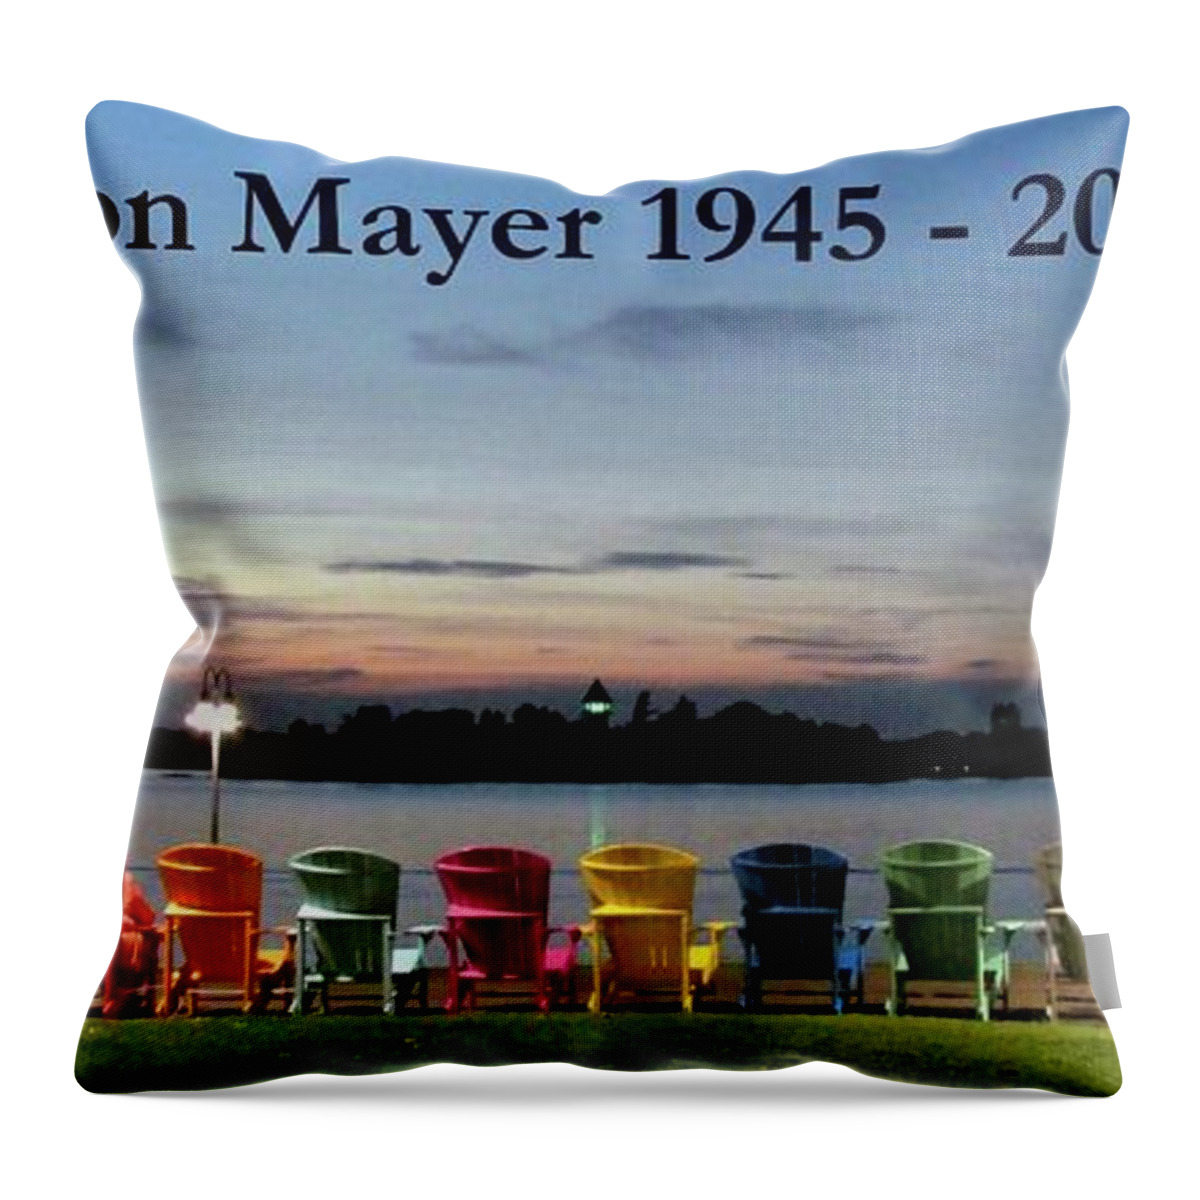  Throw Pillow featuring the photograph Ron Mayer by Dennis McCarthy